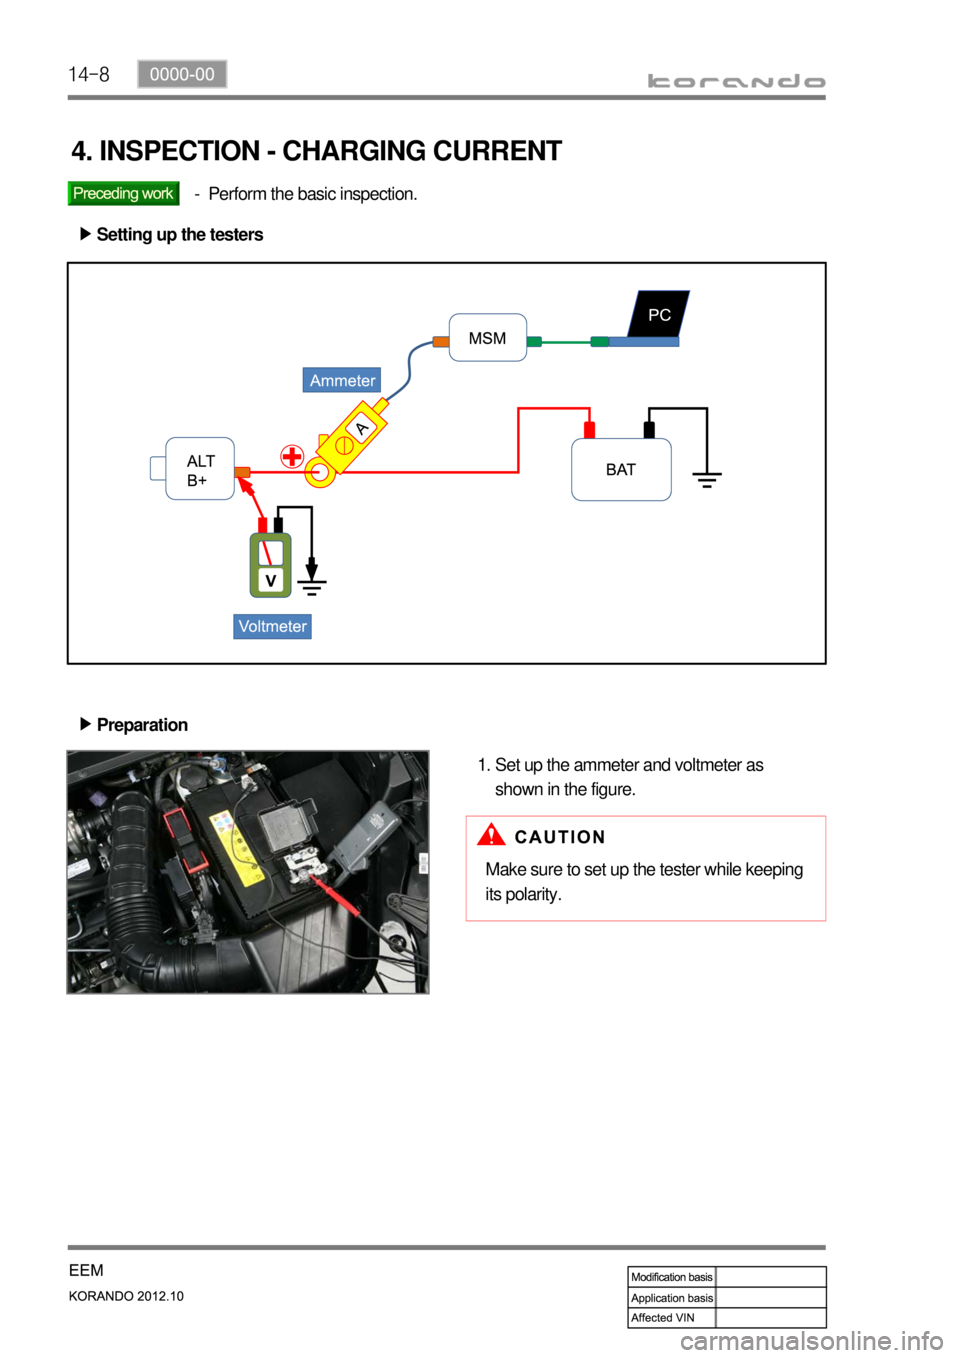 SSANGYONG KORANDO 2012  Service Manual 14-8
4. INSPECTION - CHARGING CURRENT
Perform the basic inspection. -
Setting up the testers ▶
Preparation ▶
Set up the ammeter and voltmeter as 
shown in the figure. 1.
Make sure to set up the te